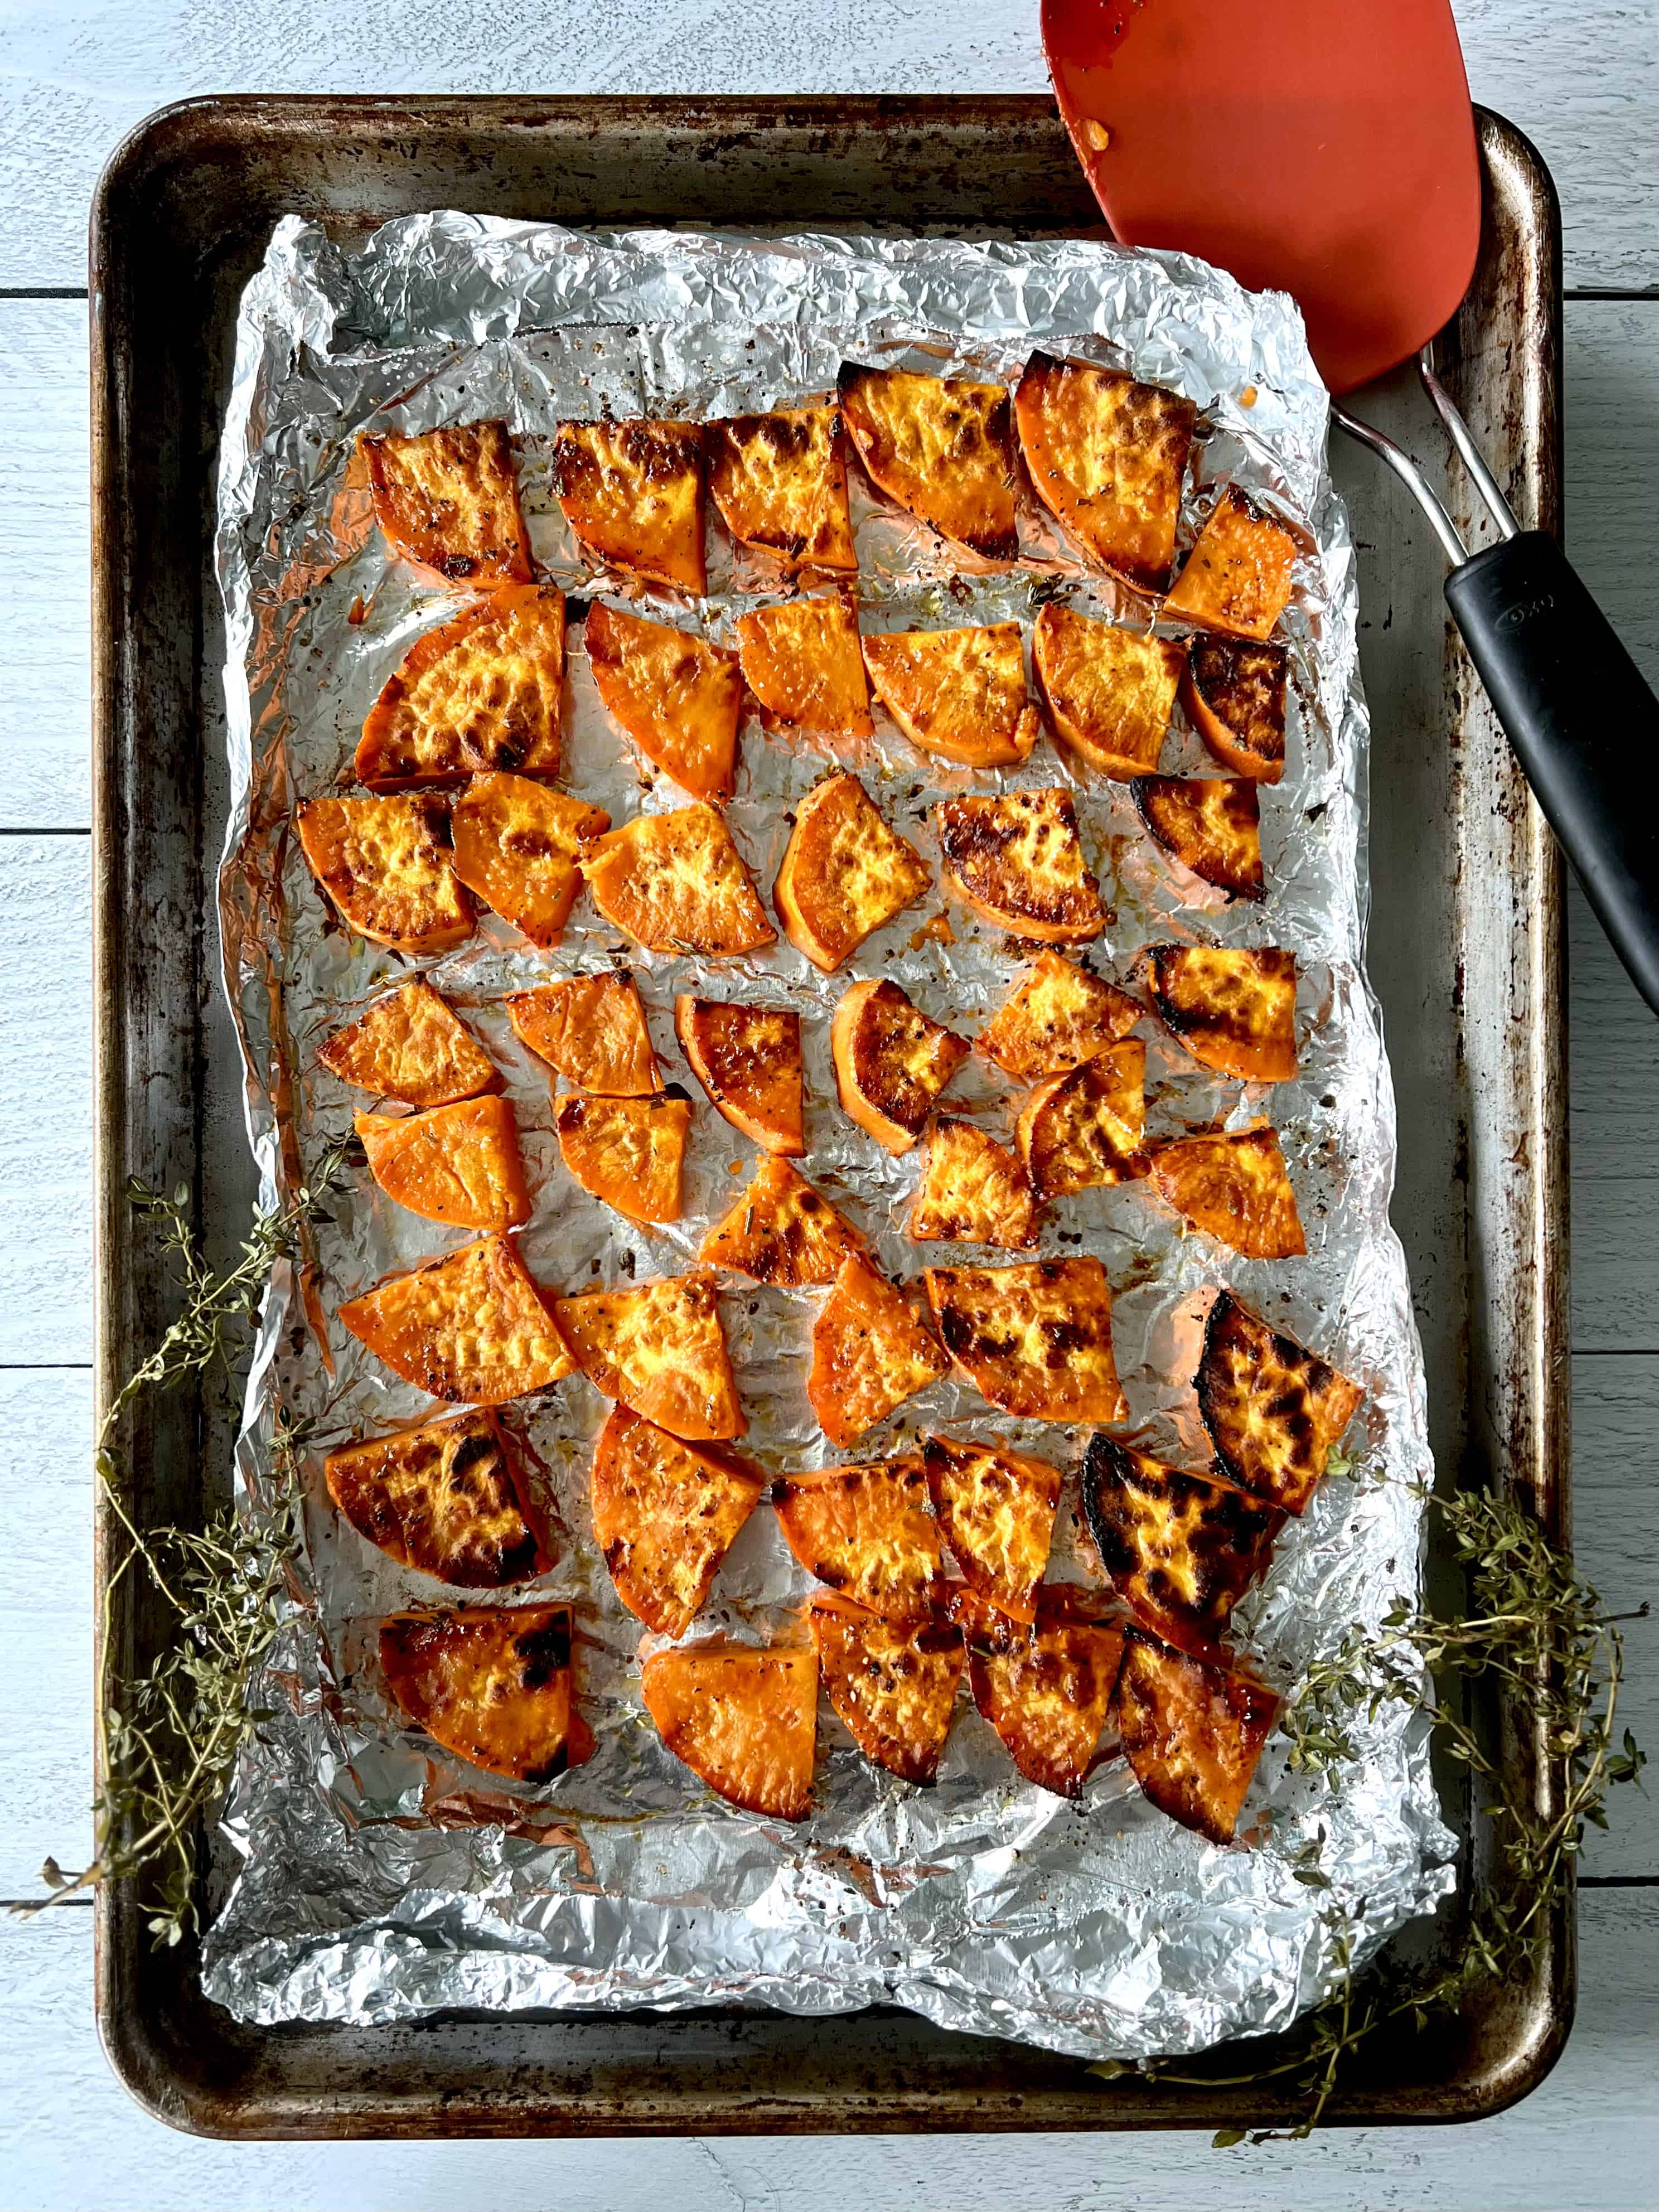 Slightly charred slices of sweet potato on a foil-lined baking sheet with a spatula and thyme sprigs.